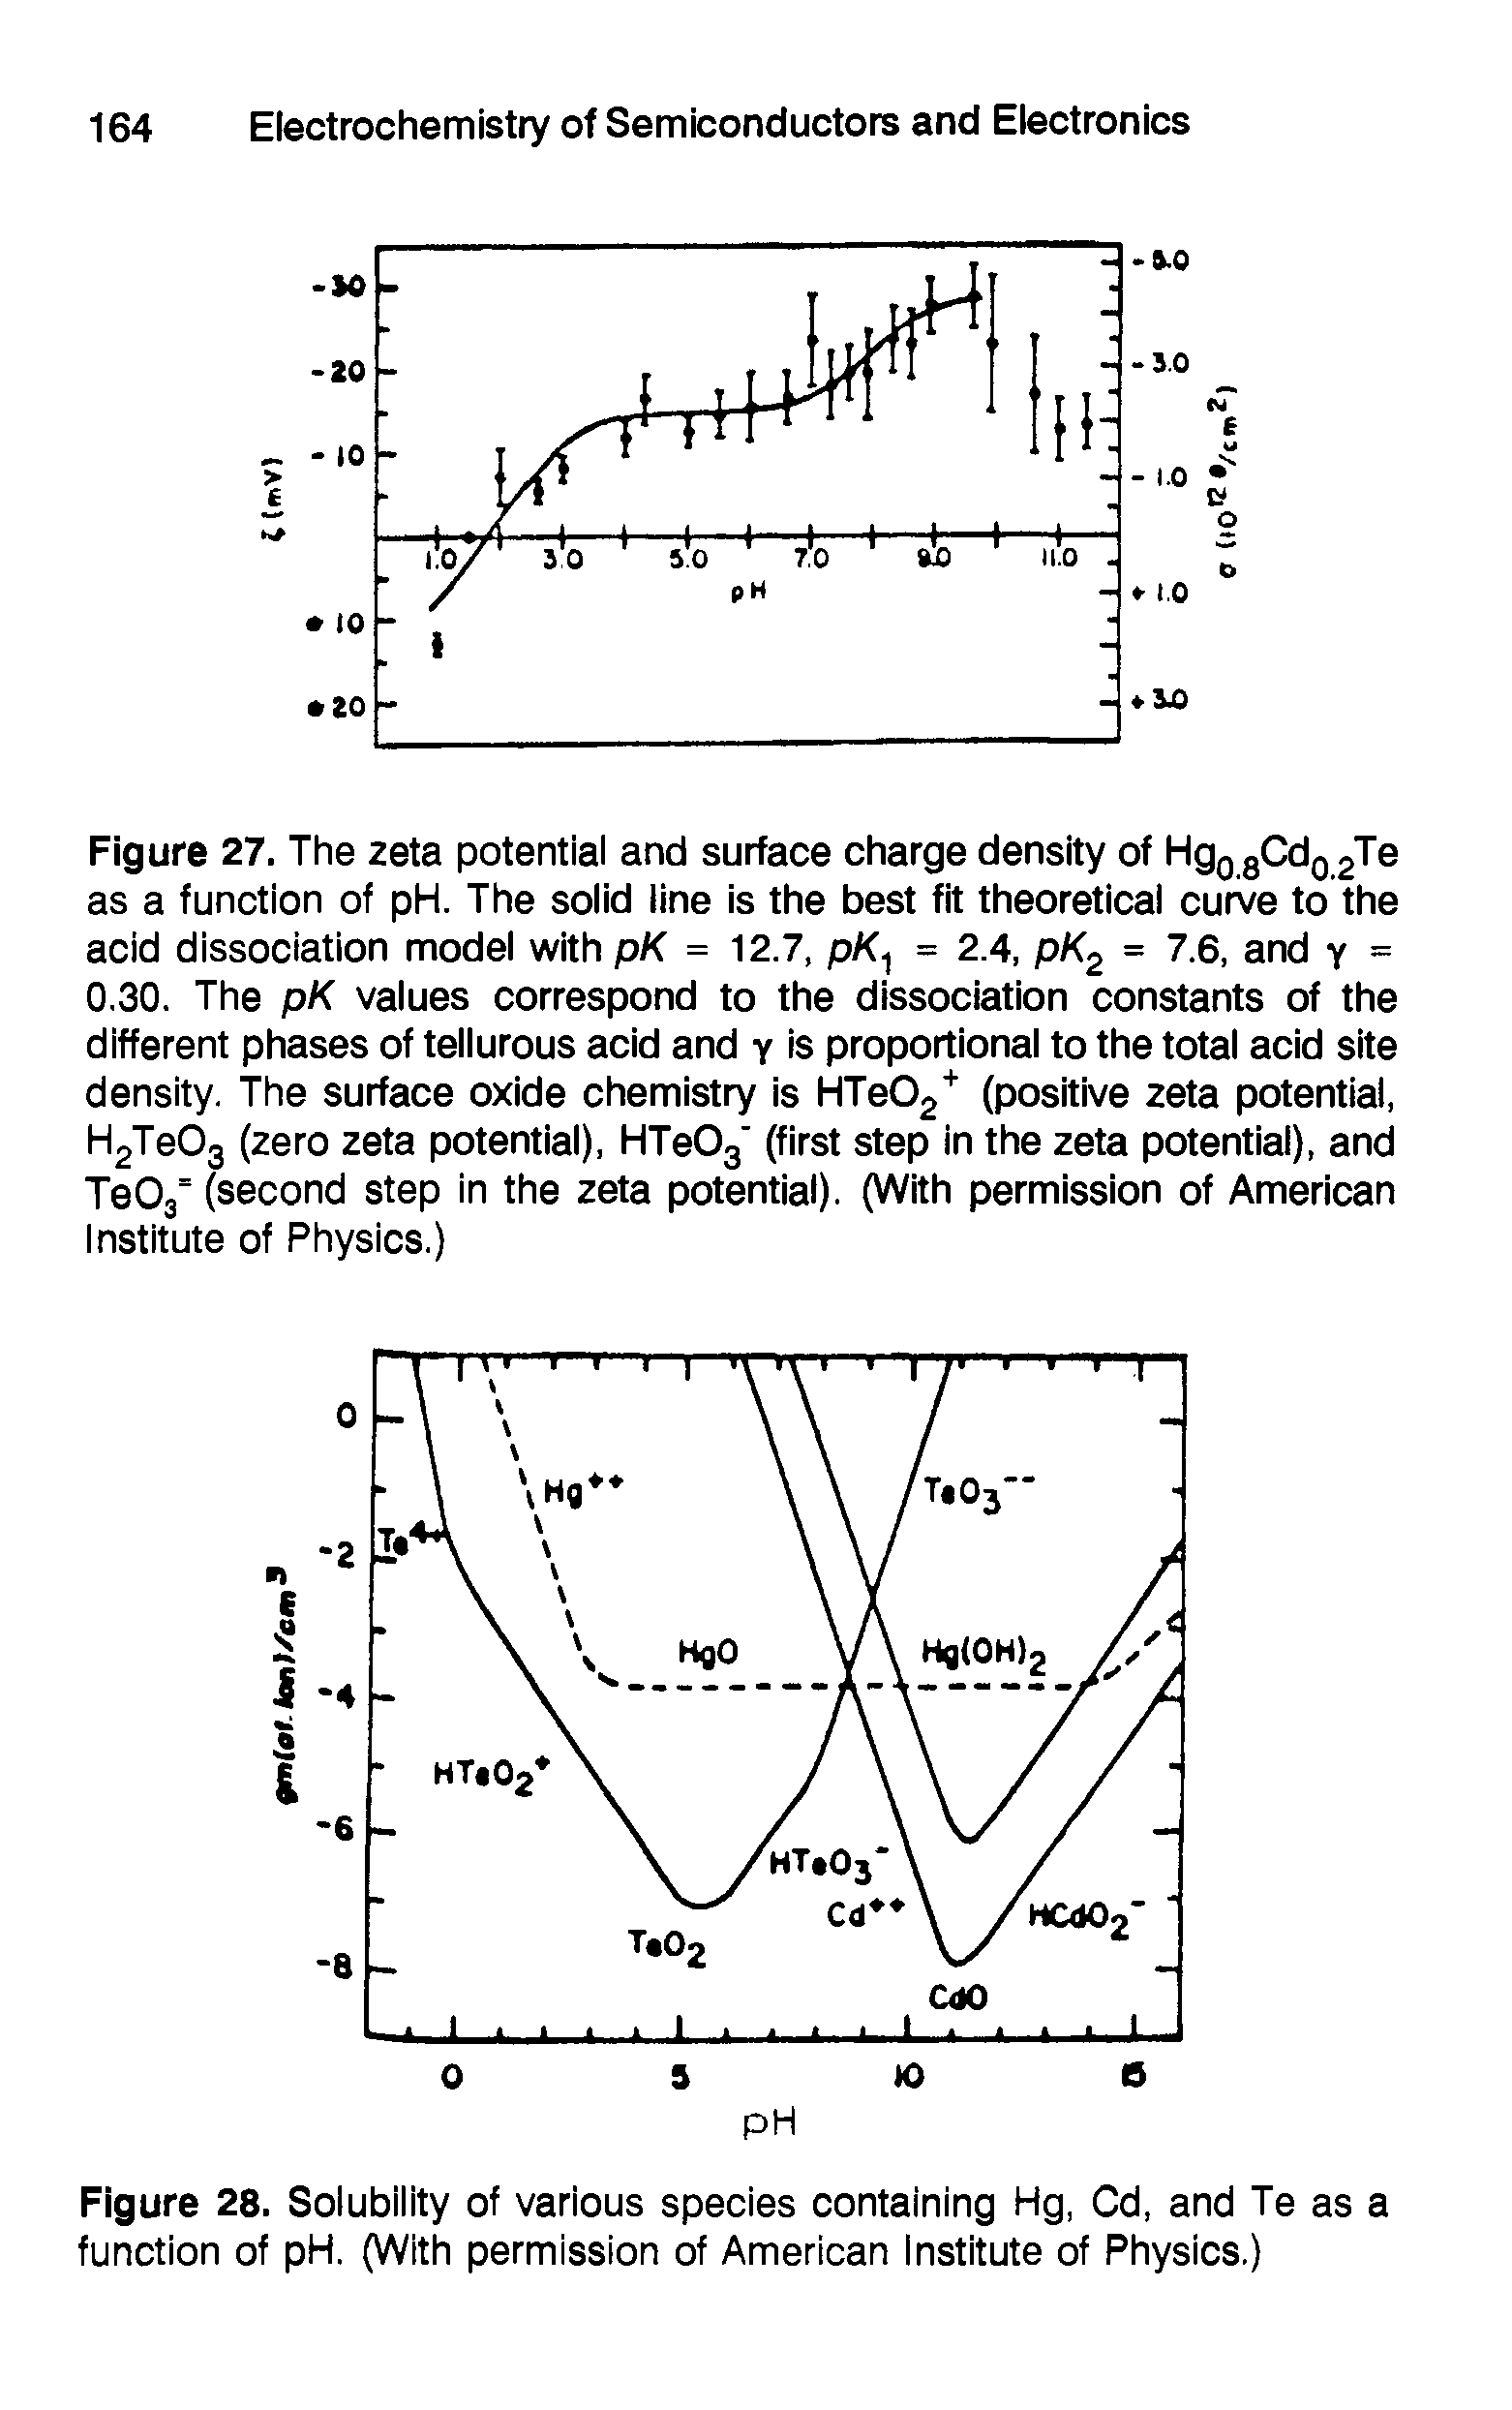 Figure 27. The zeta potential and surface charge density of HgQgCdQgTe as a function of pH. The solid line is the best fit theoretical curve to the acid dissociation model with pK = 12.7, pK = 2.4, pK = 7.6, and y = 0,30. The pK values correspond to the dissociation constants of the different phases of tellurous acid and y is proportional to the total acid site density. The surface oxide chemistry is HTeOg" (positive zeta potential, H2Te03 (zero zeta potential), HTeOg (first step in the zeta potential), and TeOa" (second step in the zeta potential). (With permission of American Institute of Physics.)...